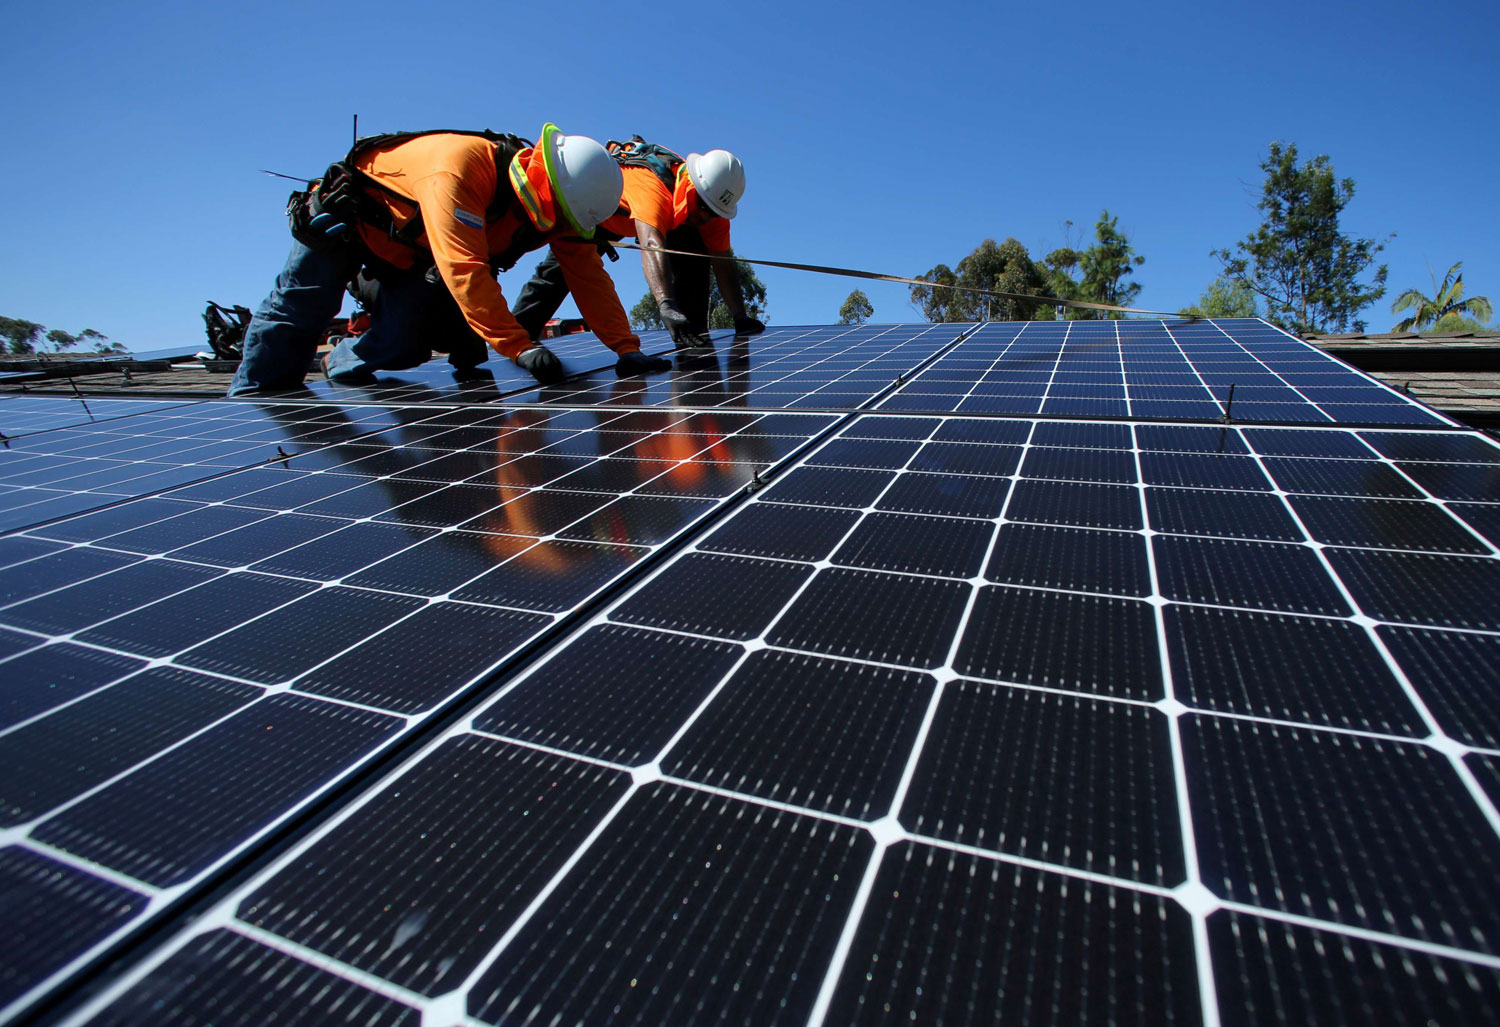 european-union-solar-power-generation-hits-record-high-in-june-july